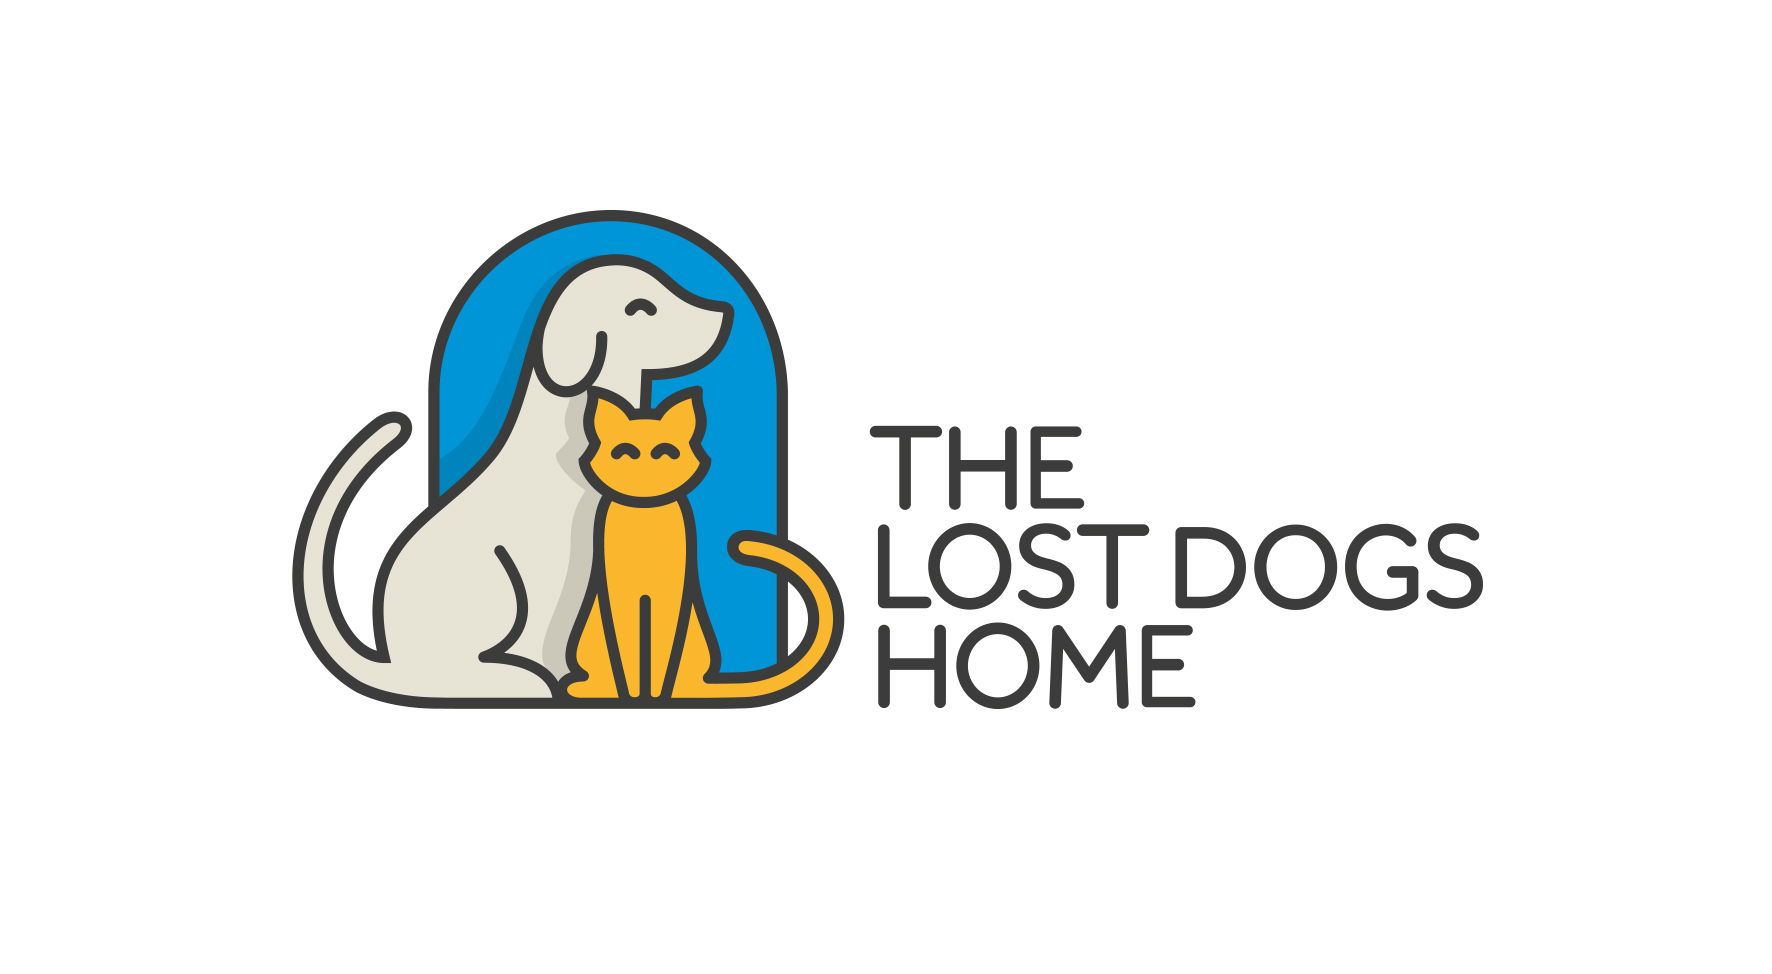 The Lost Dogs' Home logo